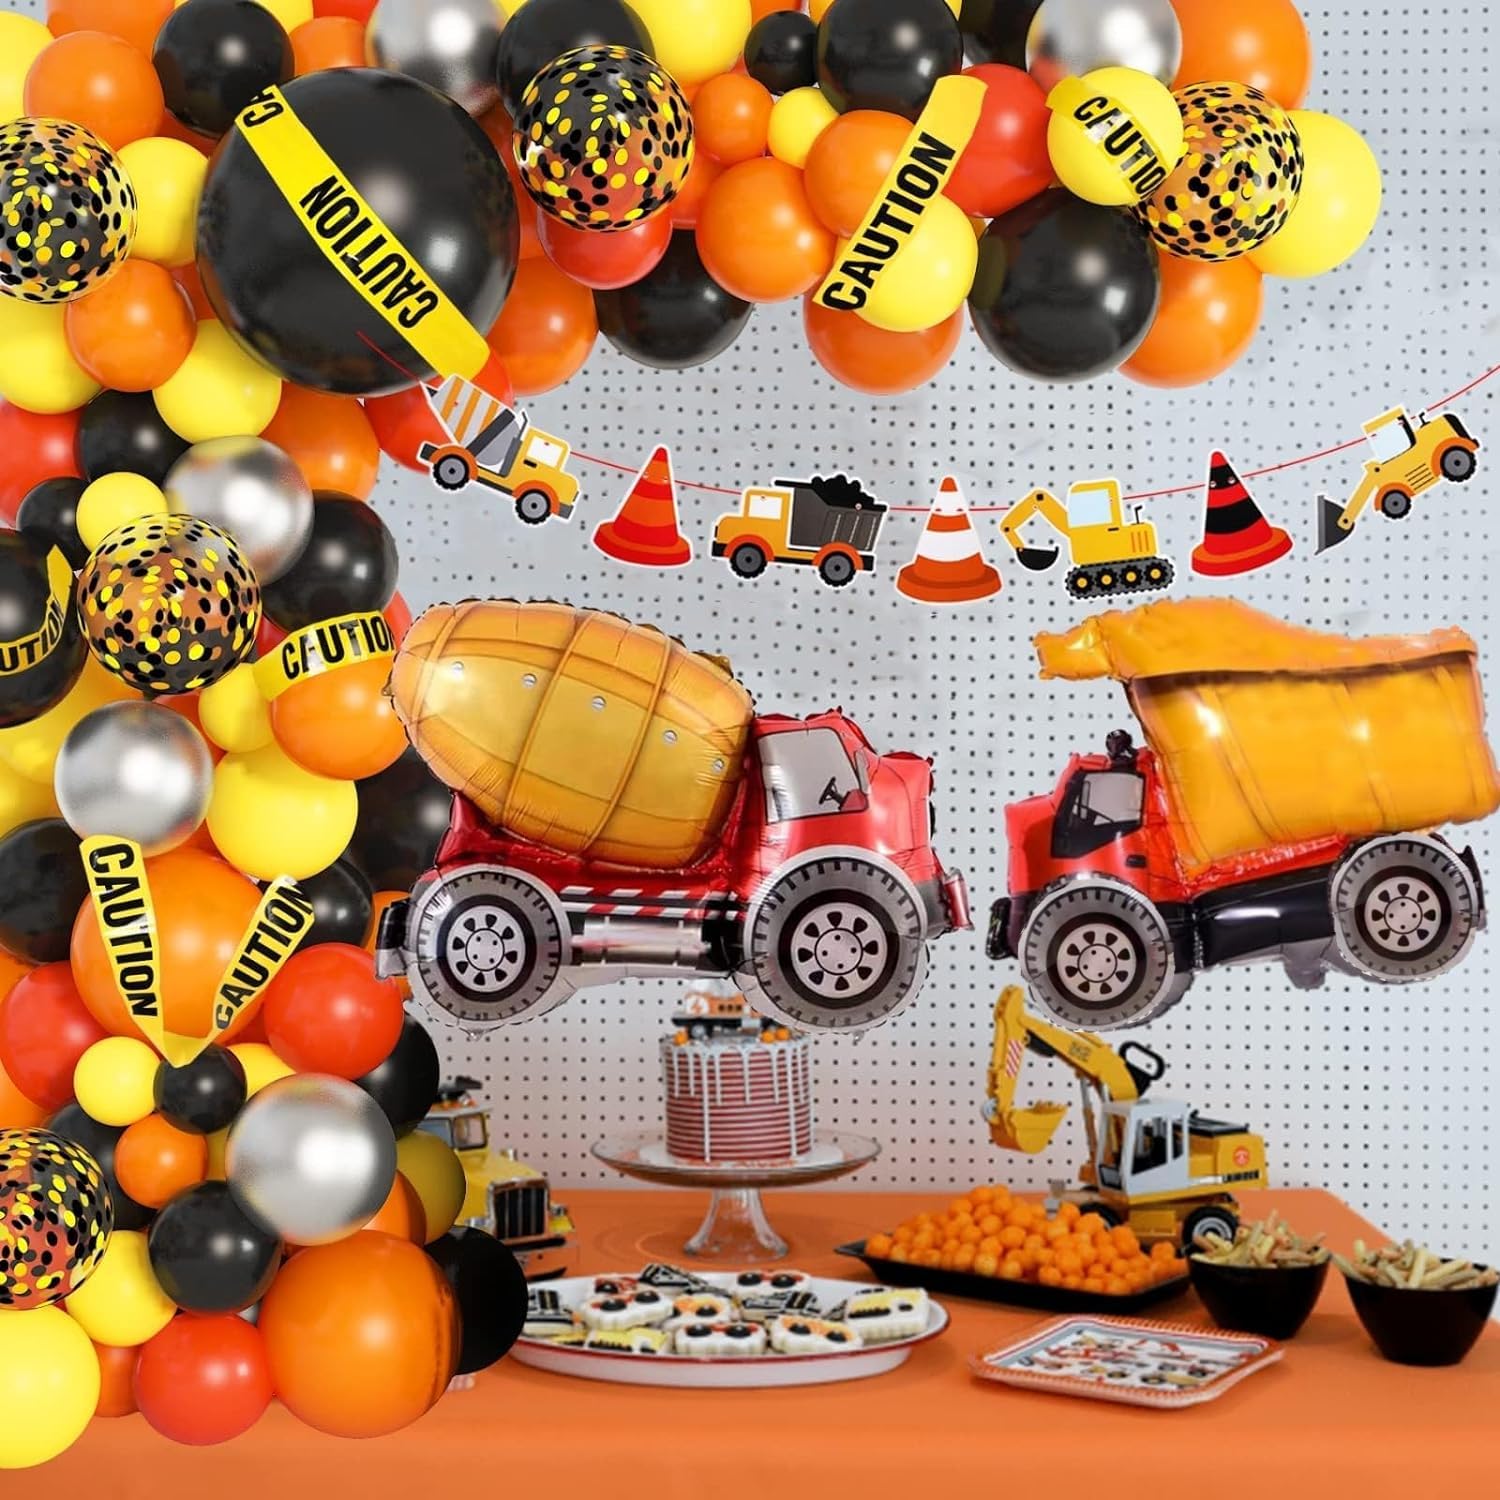 Amandir Construction Party Balloon Garland Kit, Construction Birthday Party Supplies with Orange Black Truck Foil Balloon Caution Tape Truck Banner for Construction Quarantine Party Decorations